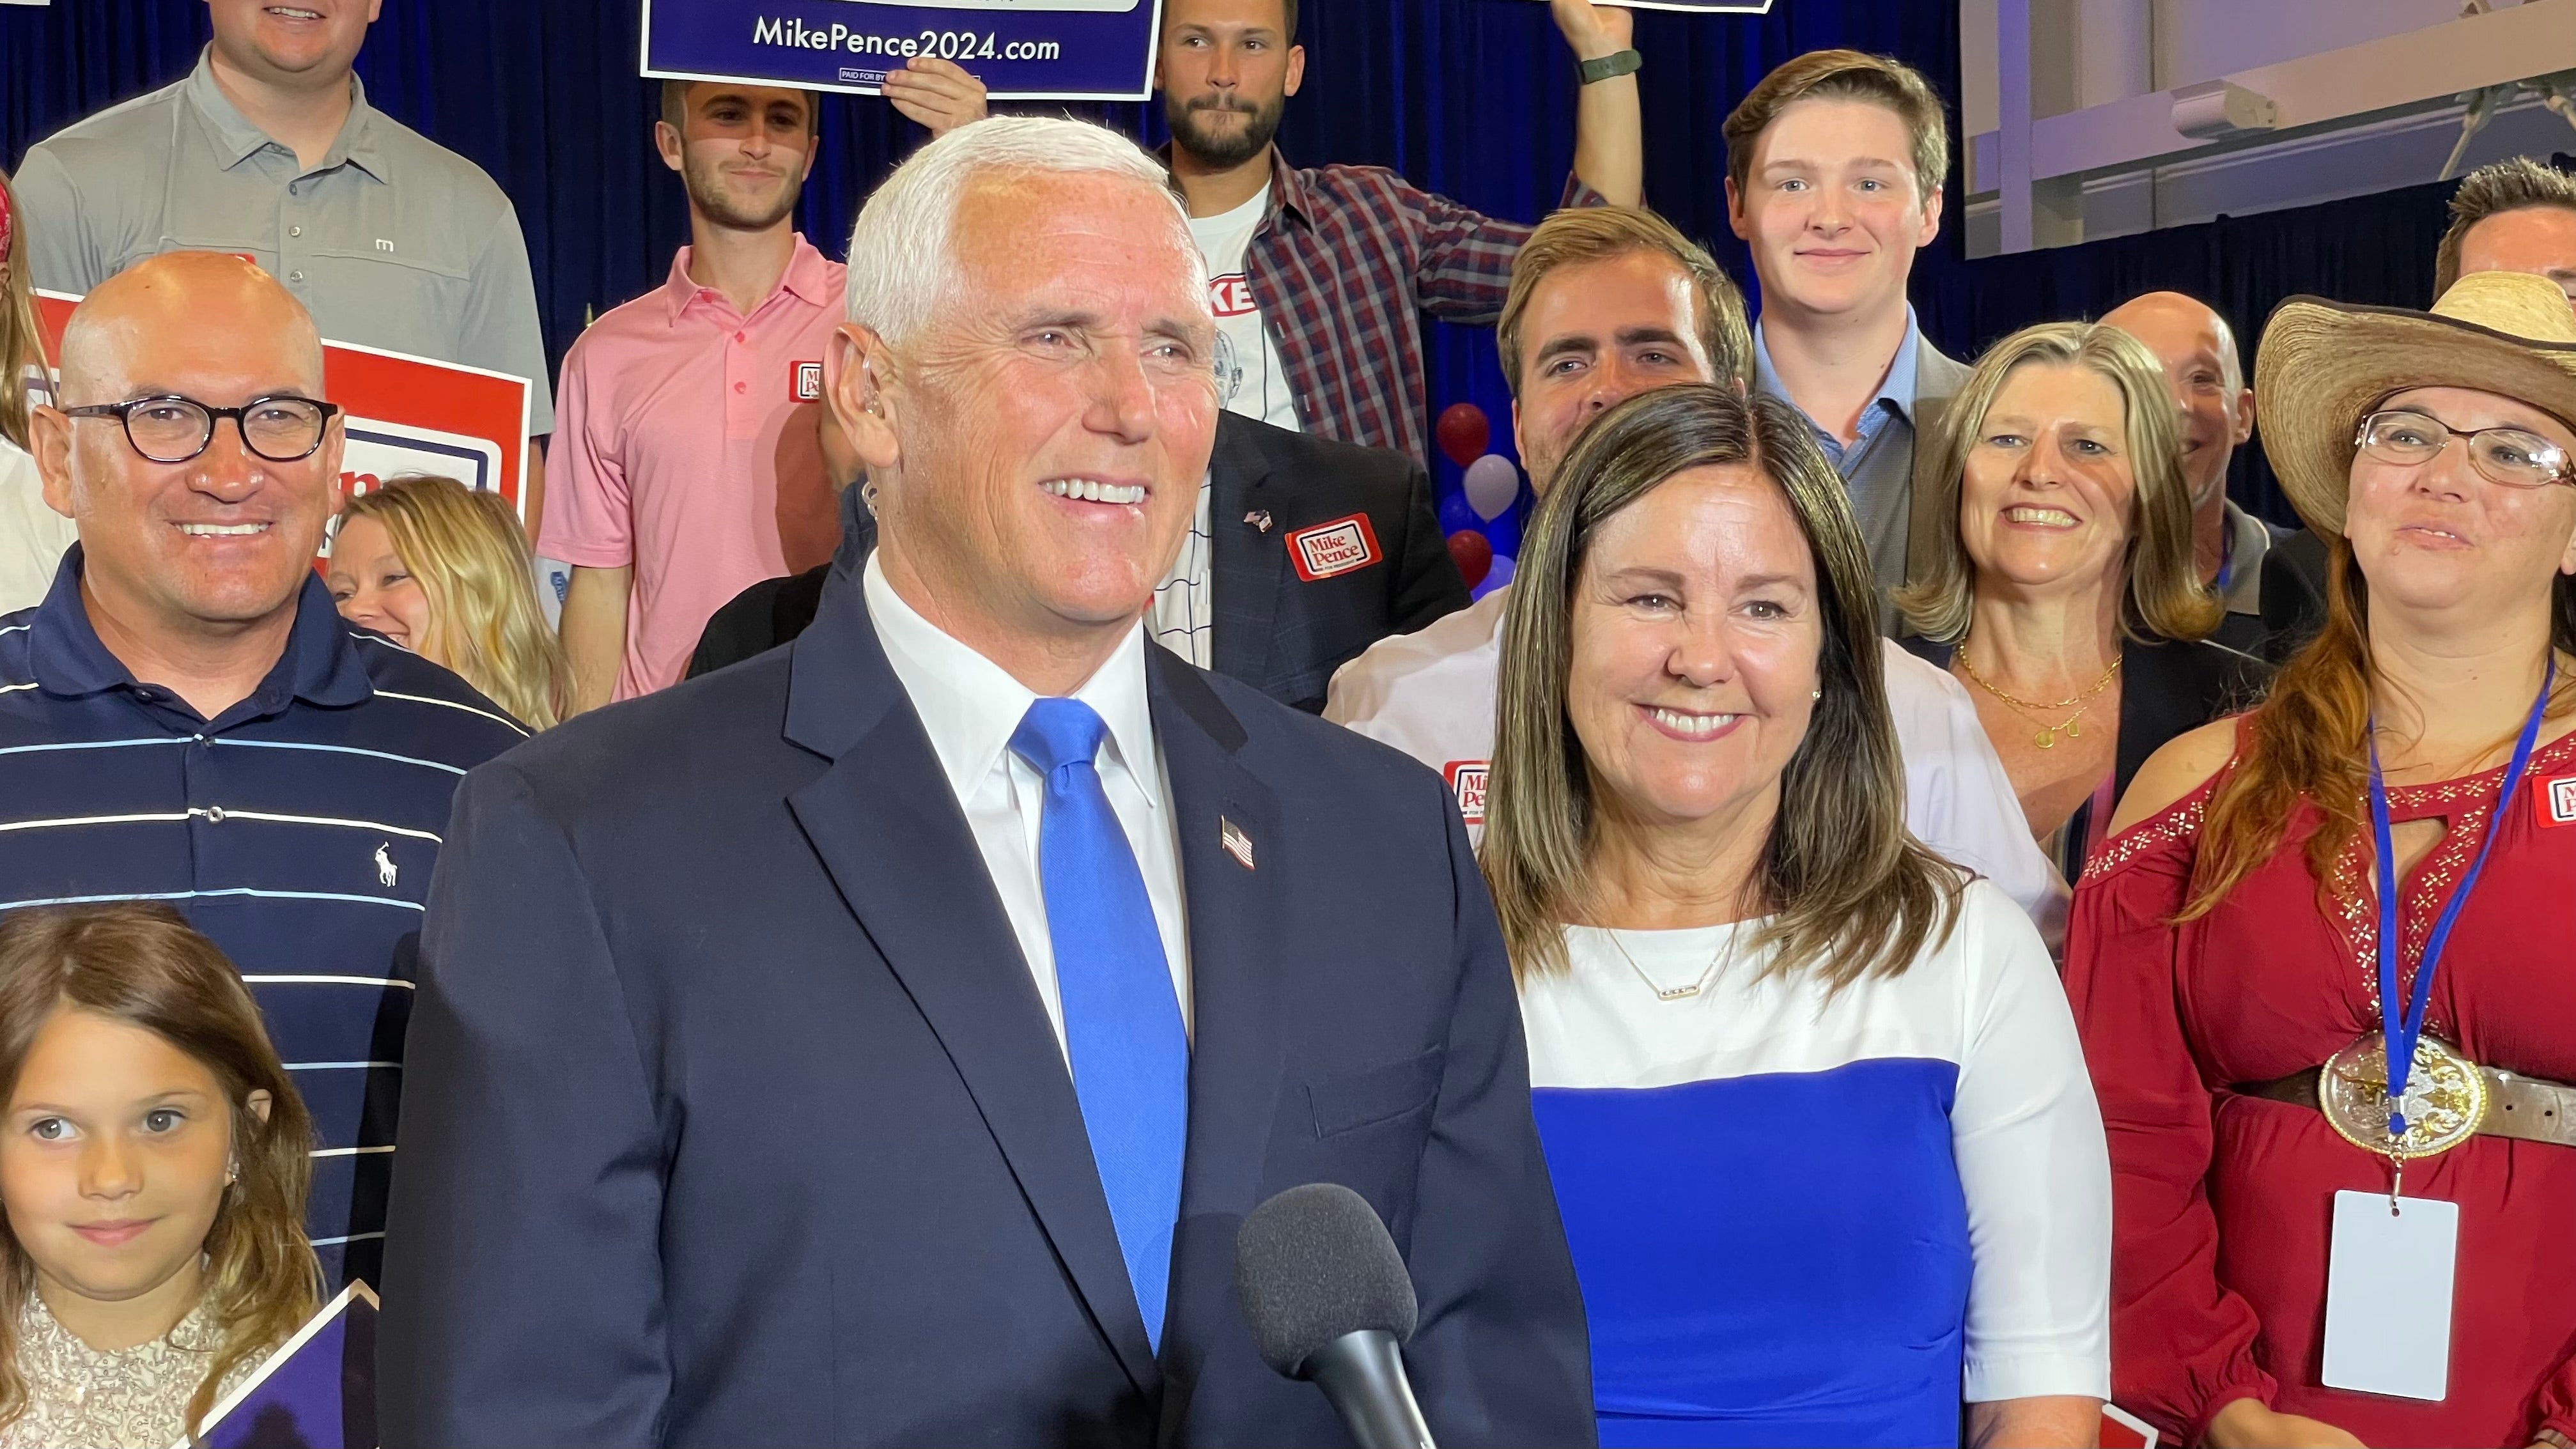 Mike Pence 2024 bid will 'test' whether GOP changed, Trump and others